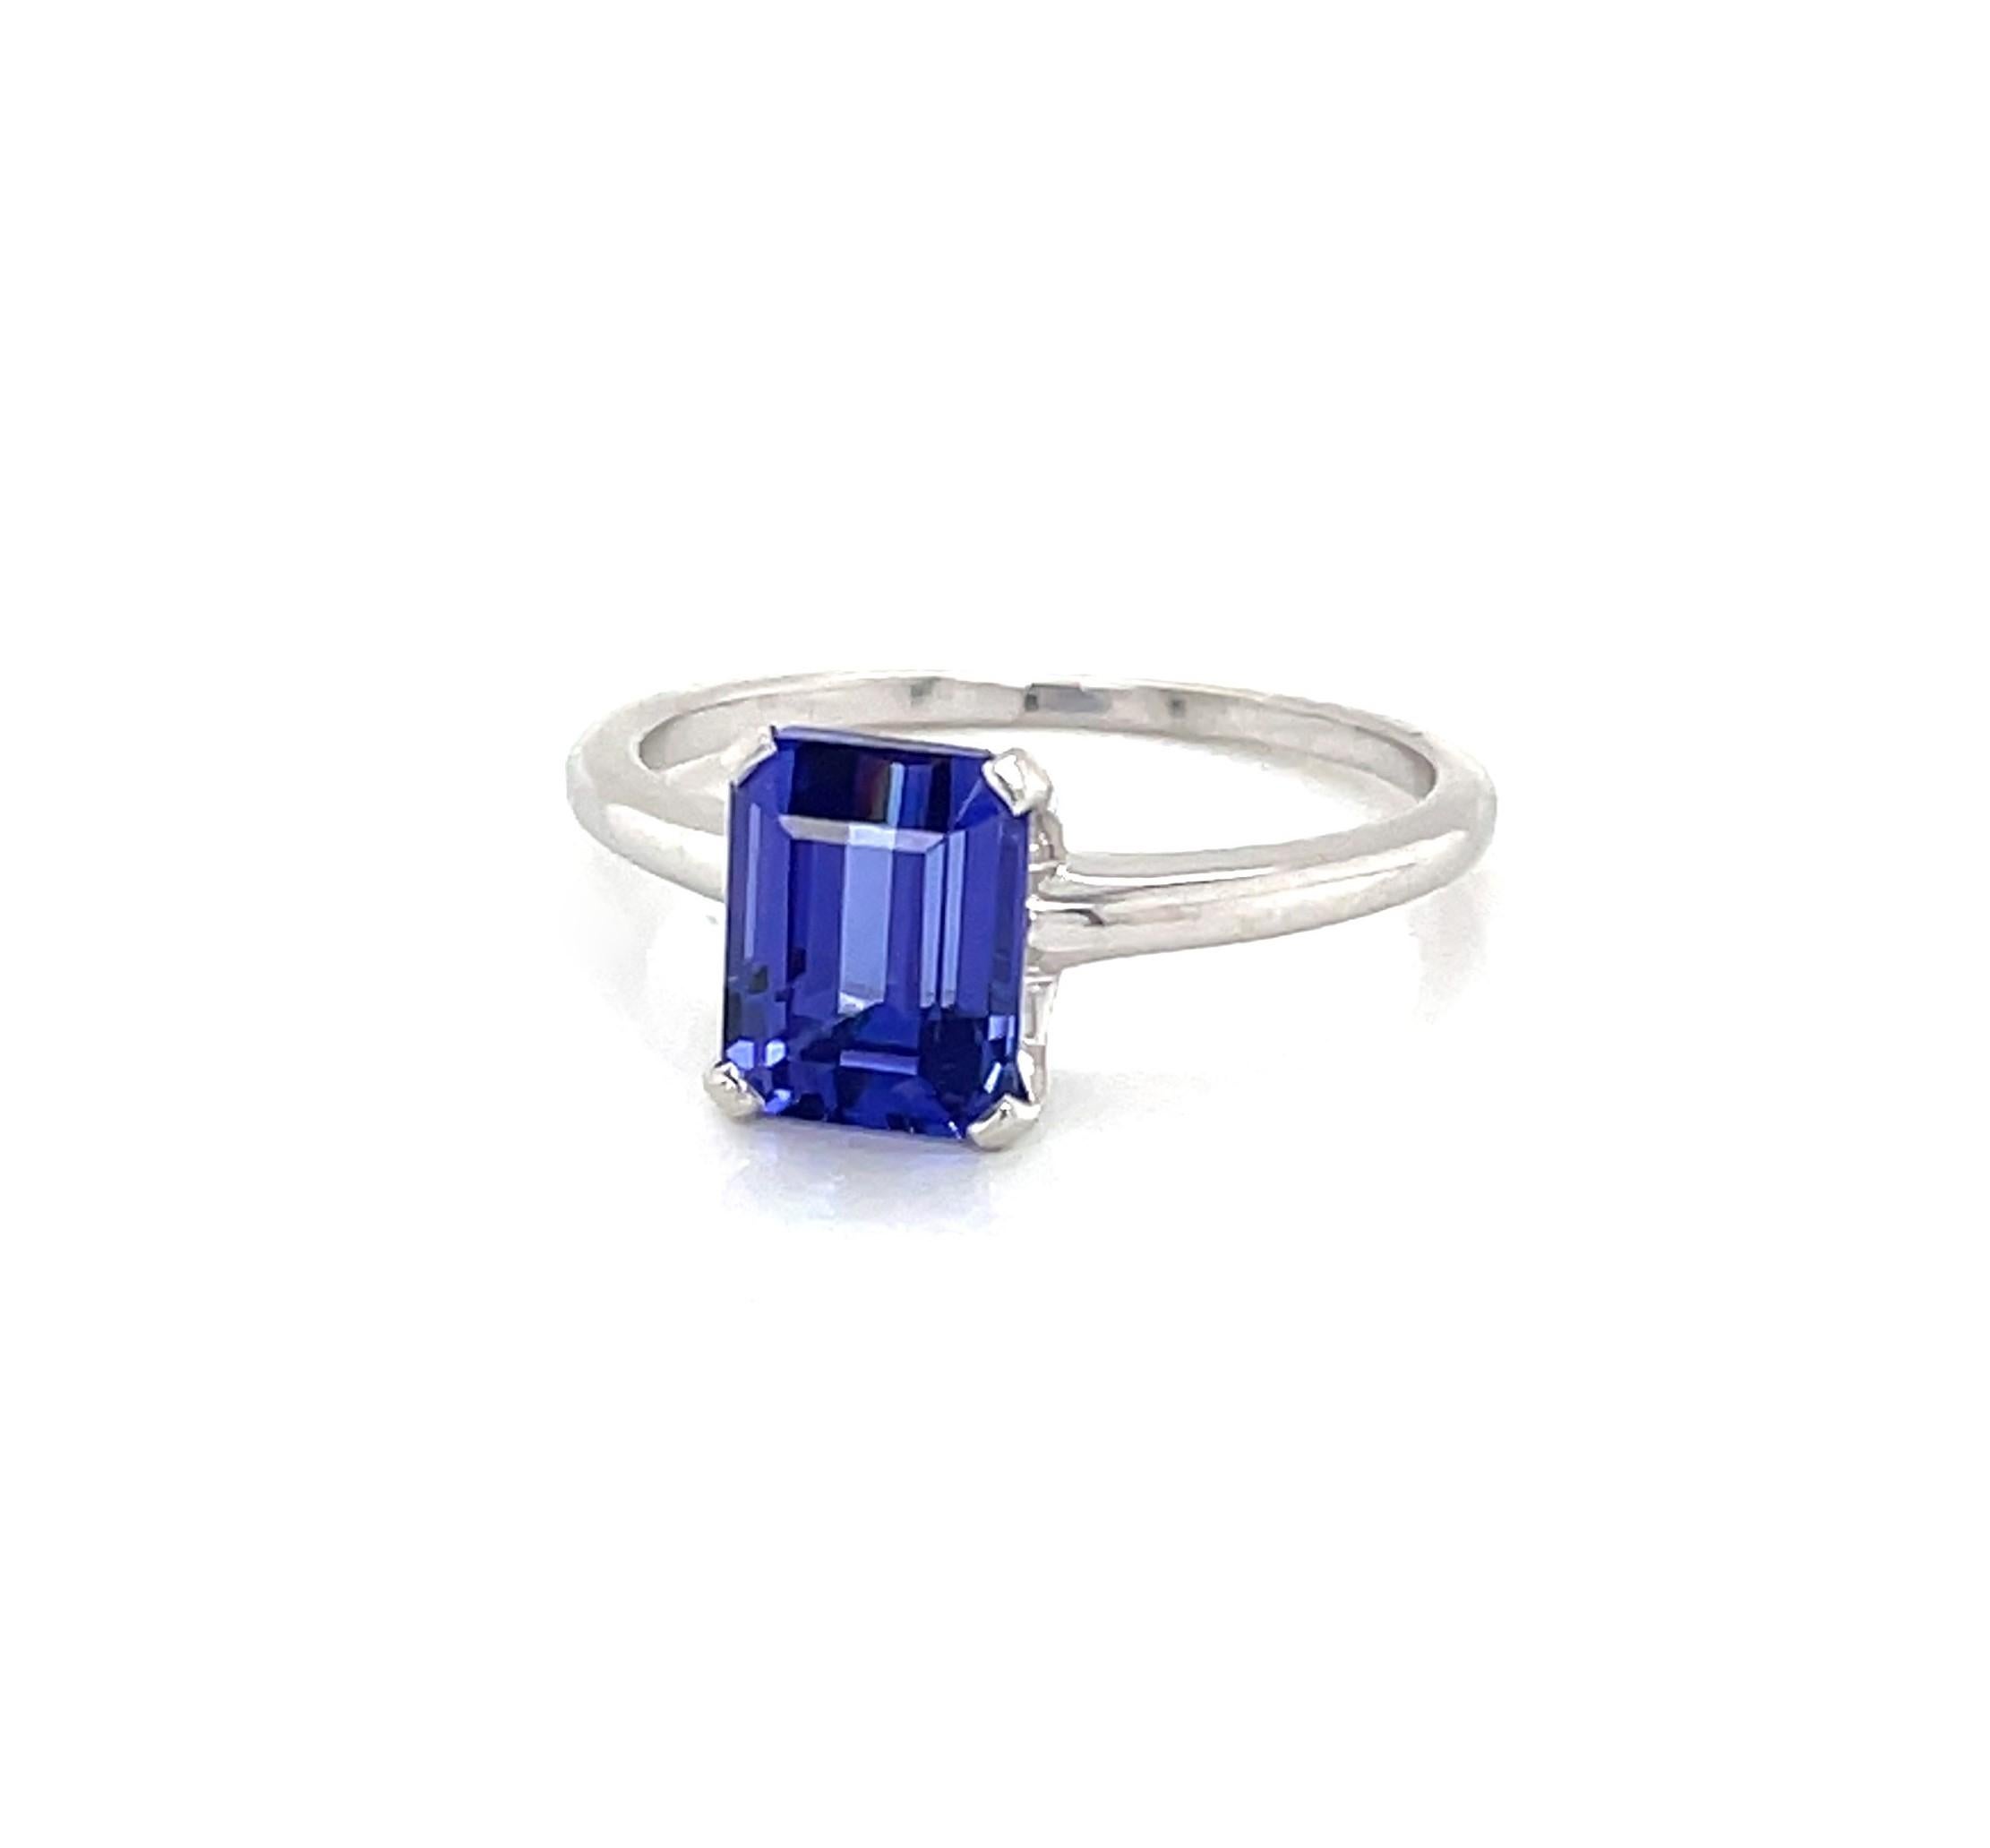 The stunning natural beauty of this blue violet 2.08 carat emerald cut tanzanite gemstone is accentuated by its sophisticated yet simplistic design by Tiffany & Company. This outstanding vintage Tiffany ring, for engagement or a special occasion, is